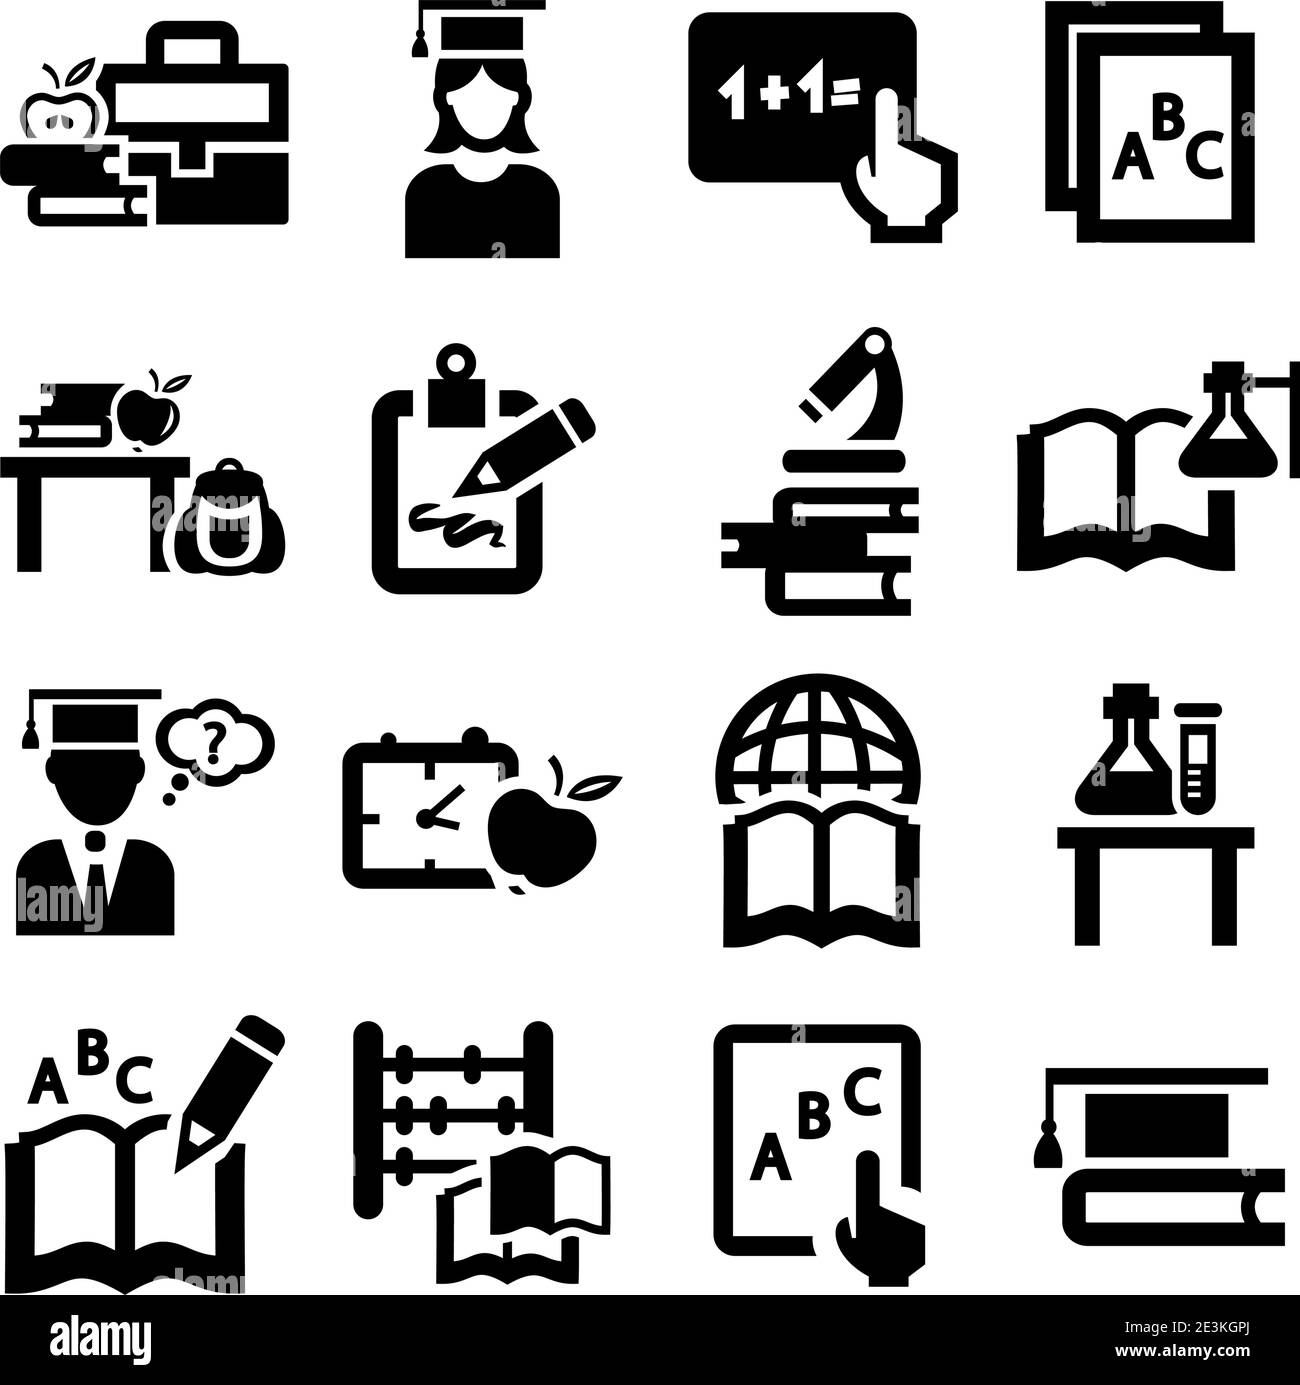 Elegant Vector Education And School Icons Set. Stock Vector